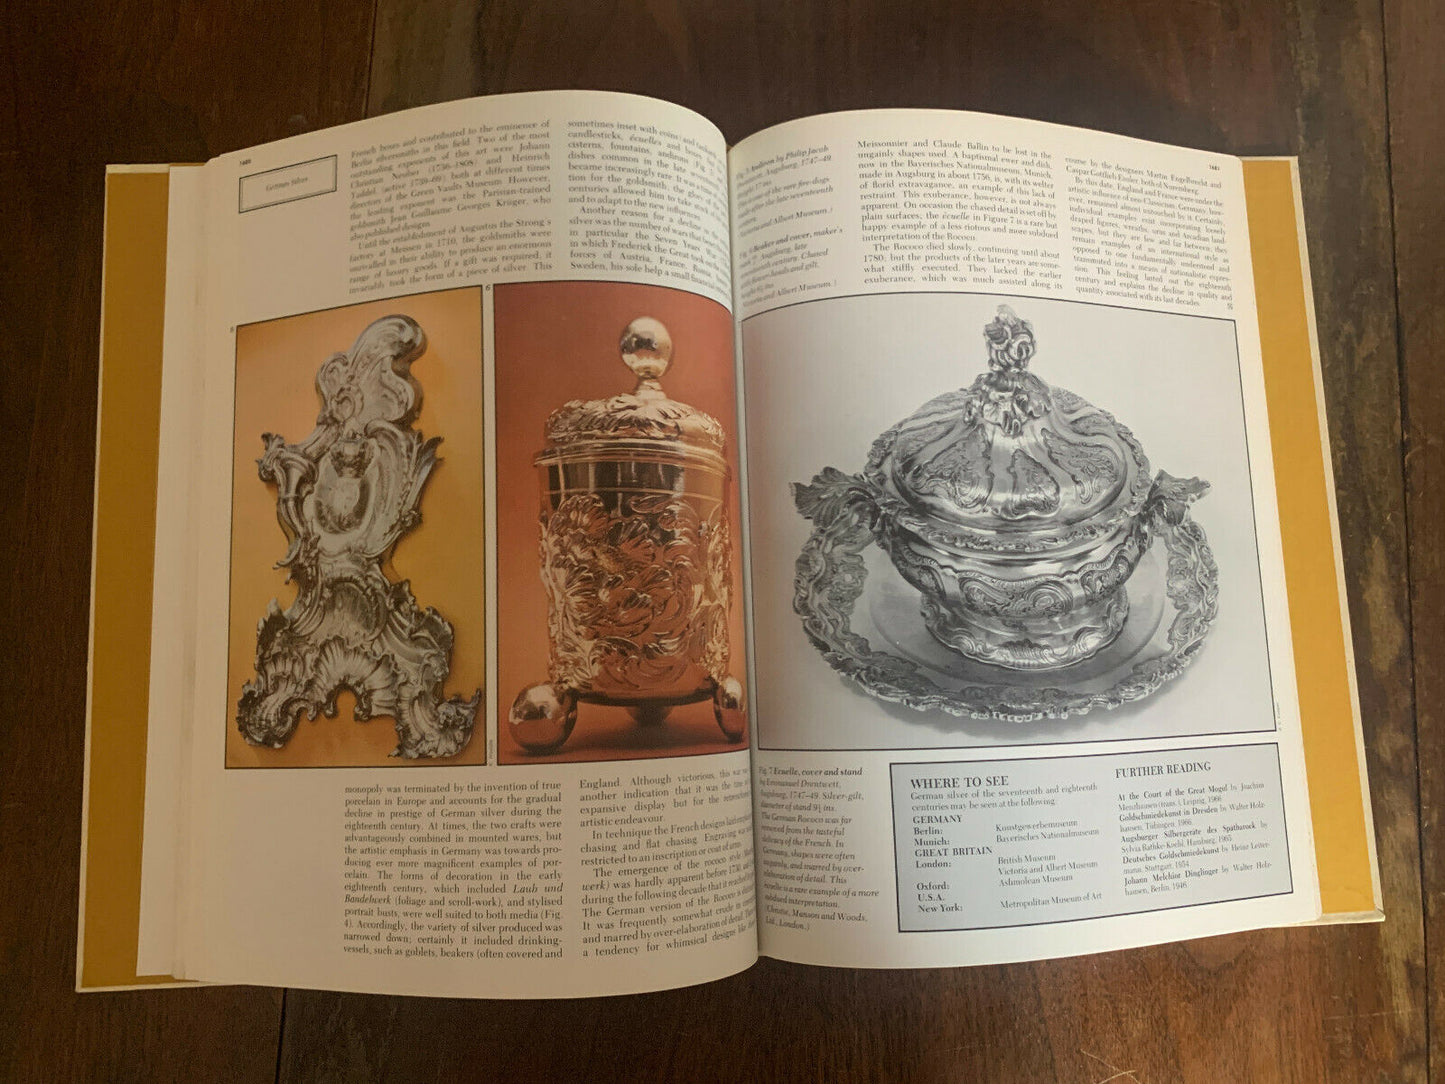 Discovering Antiques The Story of World Antiques Volume 14 (1972-1973)